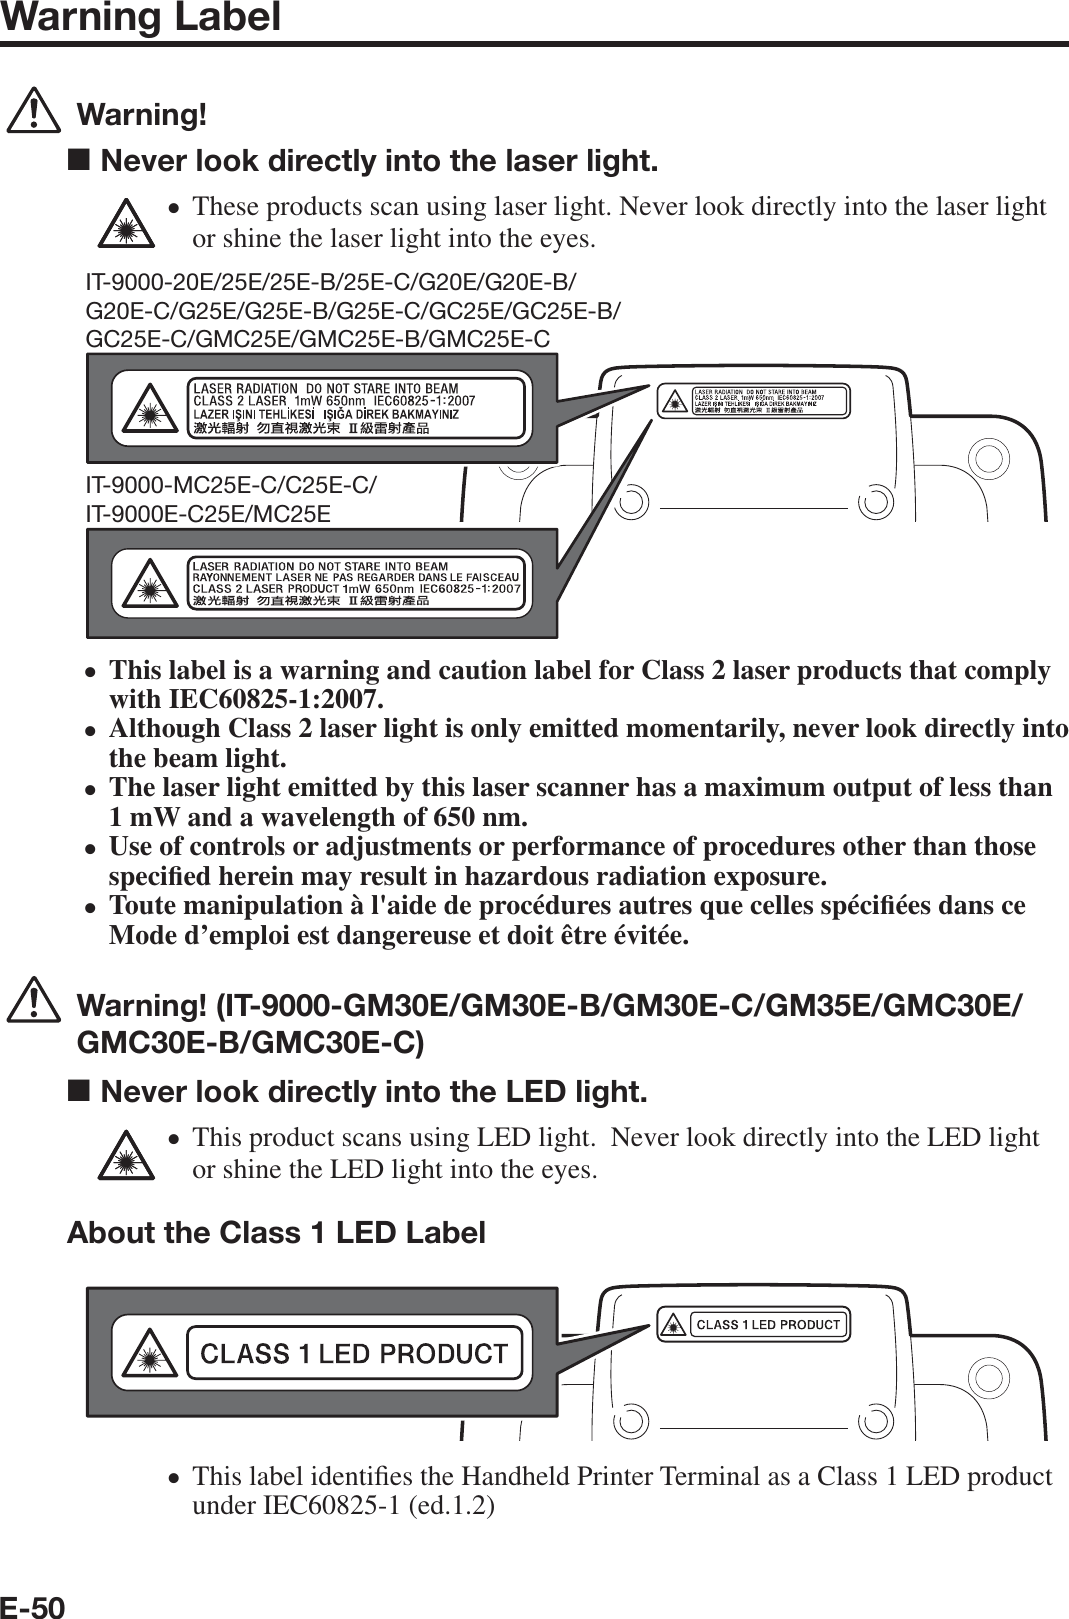 E-50Warning Label  Warning!■ Never look directly into the laser light.These products scan using laser light. Never look directly into the laser light or shine the laser light into the eyes.IT-9000-20E/25E/25E-B/25E-C/G20E/G20E-B/G20E-C/G25E/G25E-B/G25E-C/GC25E/GC25E-B/GC25E-C/GMC25E/GMC25E-B/GMC25E-CIT-9000-MC25E-C/C25E-C/IT-9000E-C25E/MC25EThis label is a warning and caution label for Class 2 laser products that comply with IEC60825-1:2007.Although Class 2 laser light is only emitted momentarily, never look directly into the beam light.The laser light emitted by this laser scanner has a maximum output of less than 1 mW and a wavelength of 650 nm.Use of controls or adjustments or performance of procedures other than those speci¿ ed herein may result in hazardous radiation exposure.Toute manipulation à l&apos;aide de procédures autres que celles spéci¿ ées dans ce Mode d’emploi est dangereuse et doit être évitée.  Warning! (IT-9000-GM30E/GM30E-B/GM30E-C/GM35E/GMC30E/GMC30E-B/GMC30E-C)■ Never look directly into the LED light.This product scans using LED light.  Never look directly into the LED light or shine the LED light into the eyes.About the Class 1 LED LabelThis label identi¿ es the Handheld Printer Terminal as a Class 1 LED product under IEC60825-1 (ed.1.2)xxxxxxxx